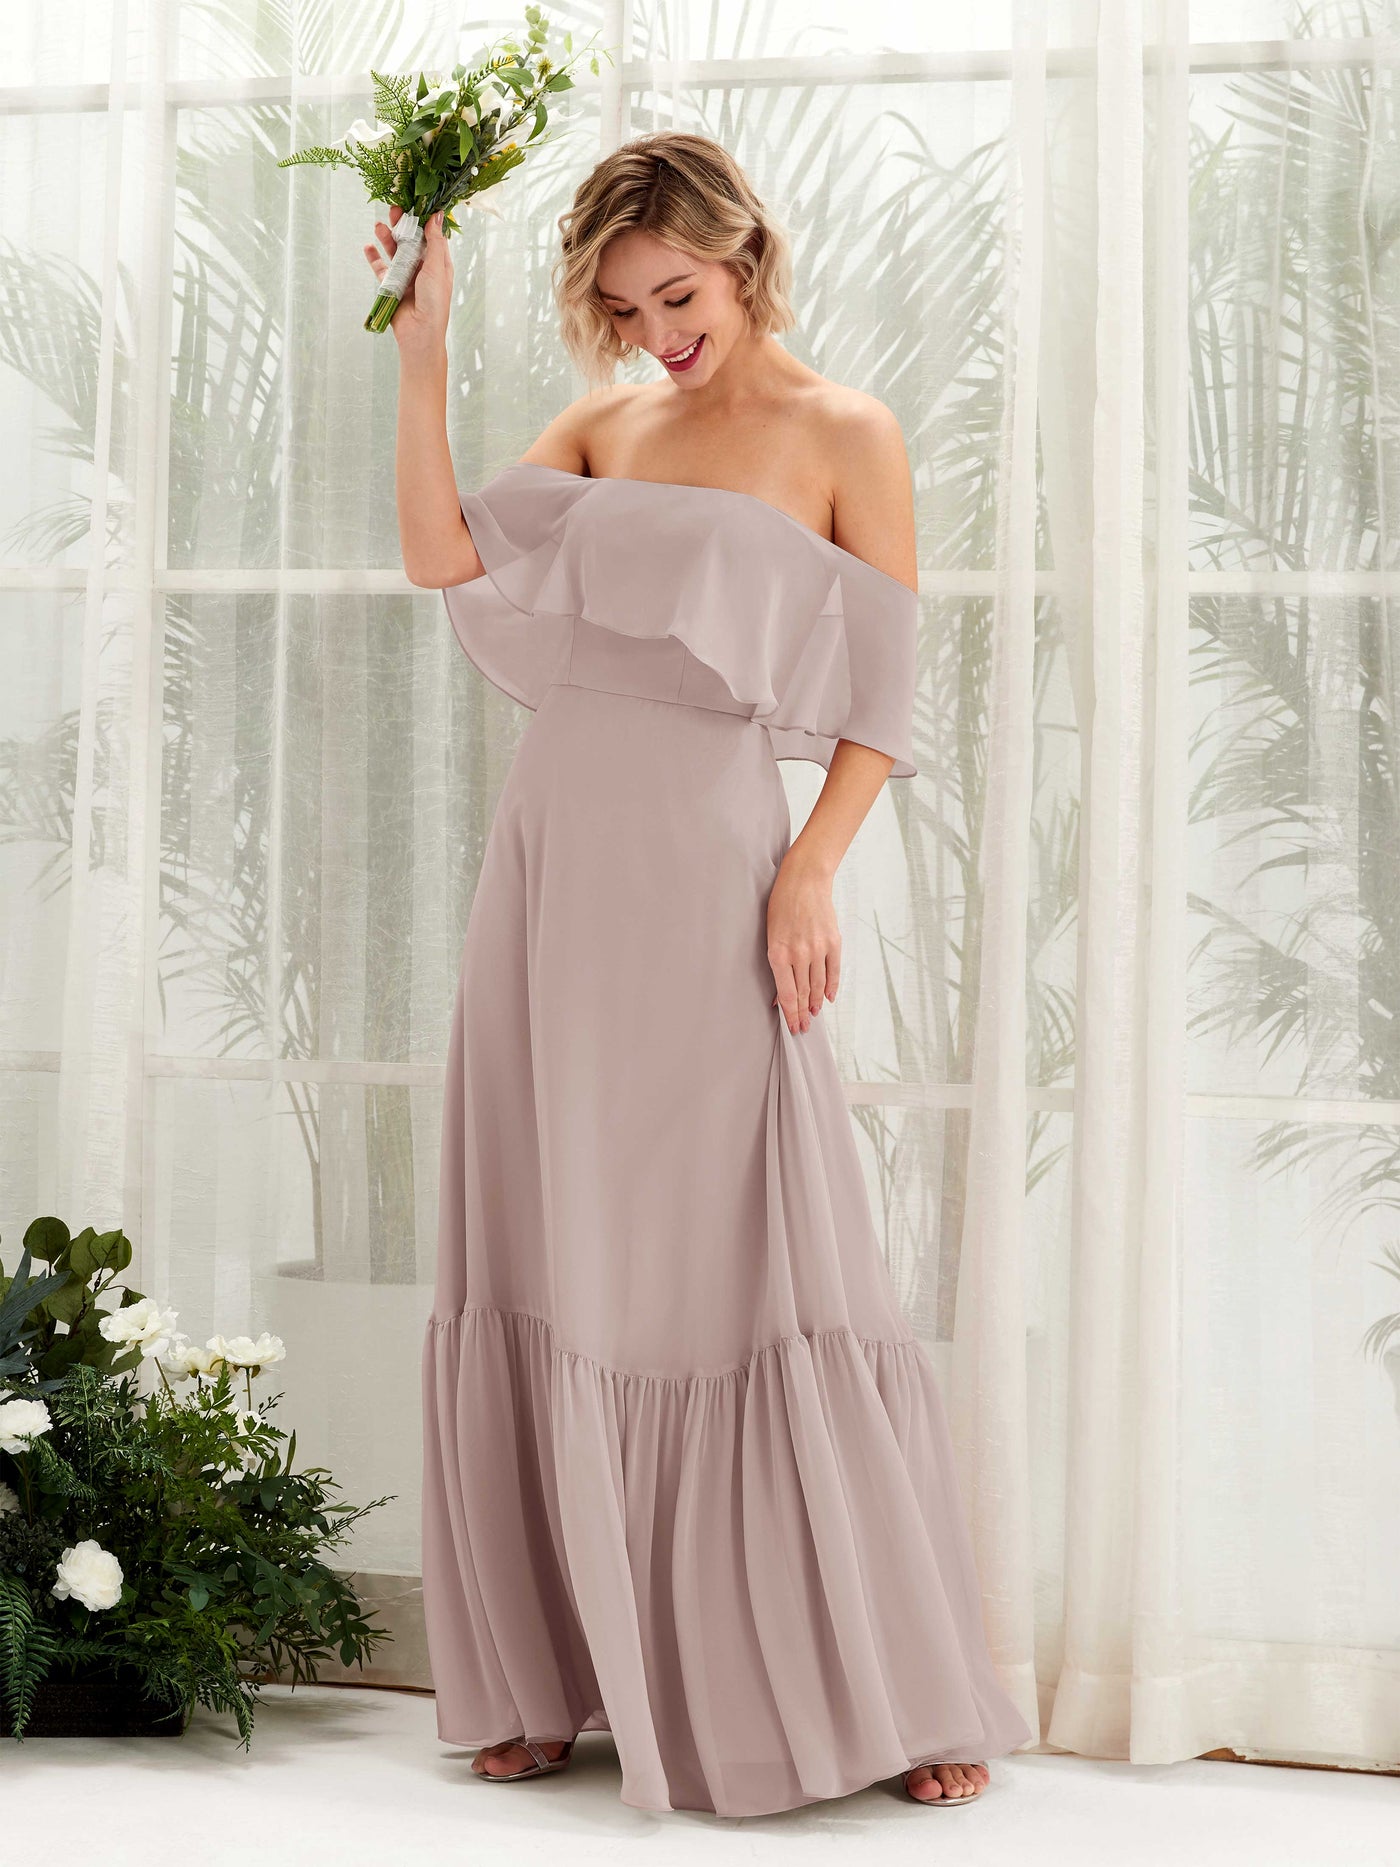 Taupe Bridesmaid Dresses Bridesmaid Dress A-line Chiffon Off Shoulder Full Length Sleeveless Wedding Party Dress (81224524)#color_taupe